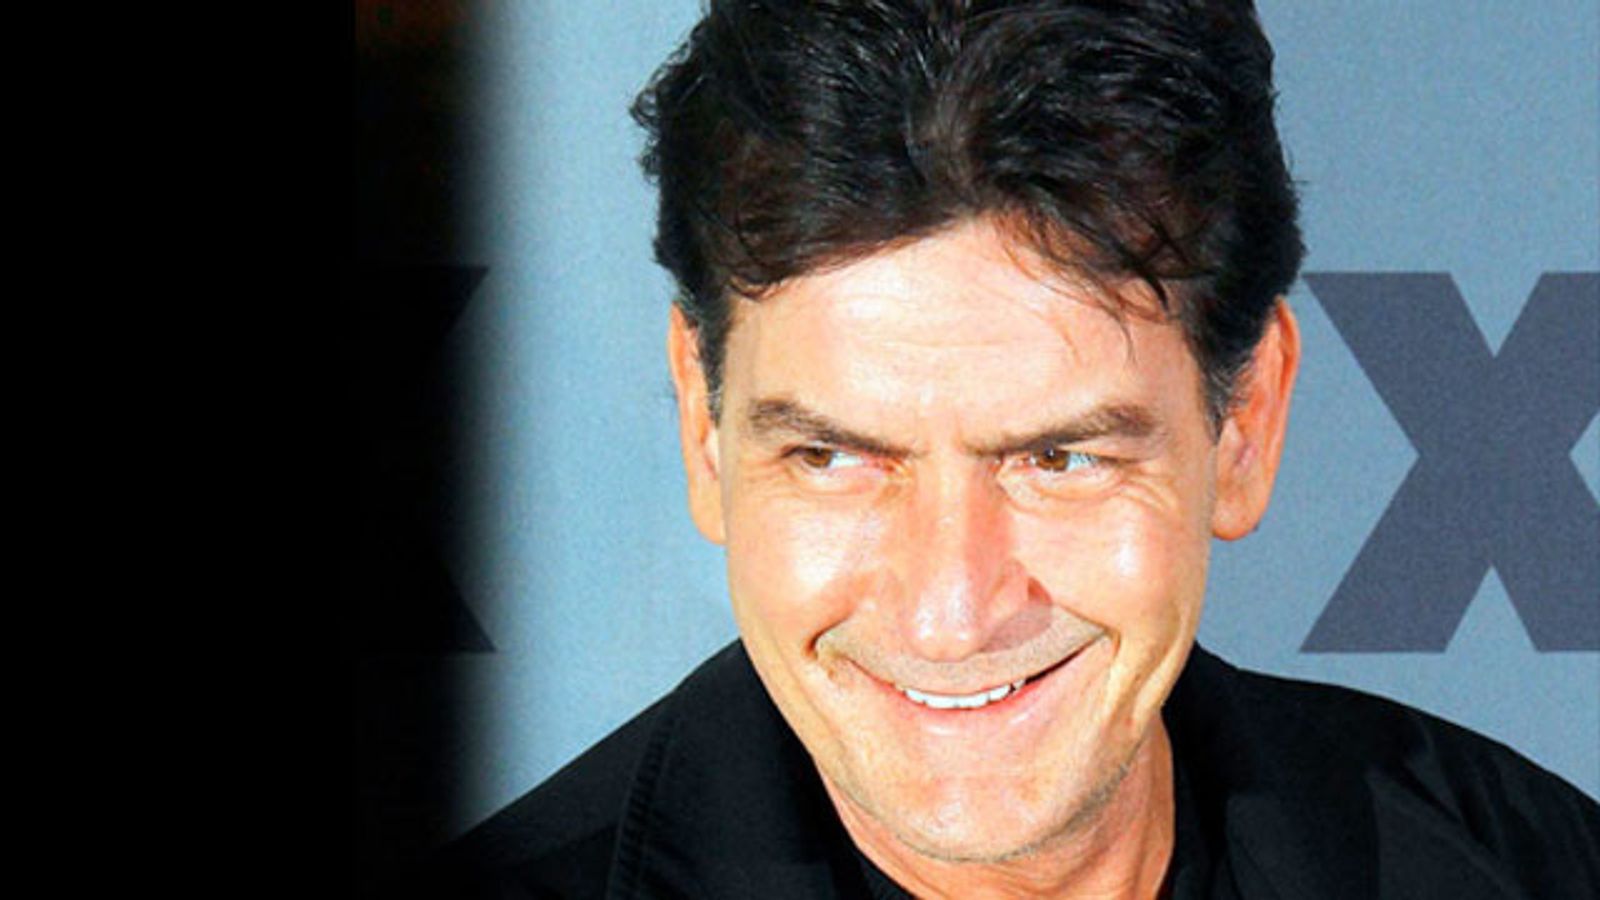 Charlie Sheen: ‘I’m Here To Admit I Am In Fact HIV Positive’